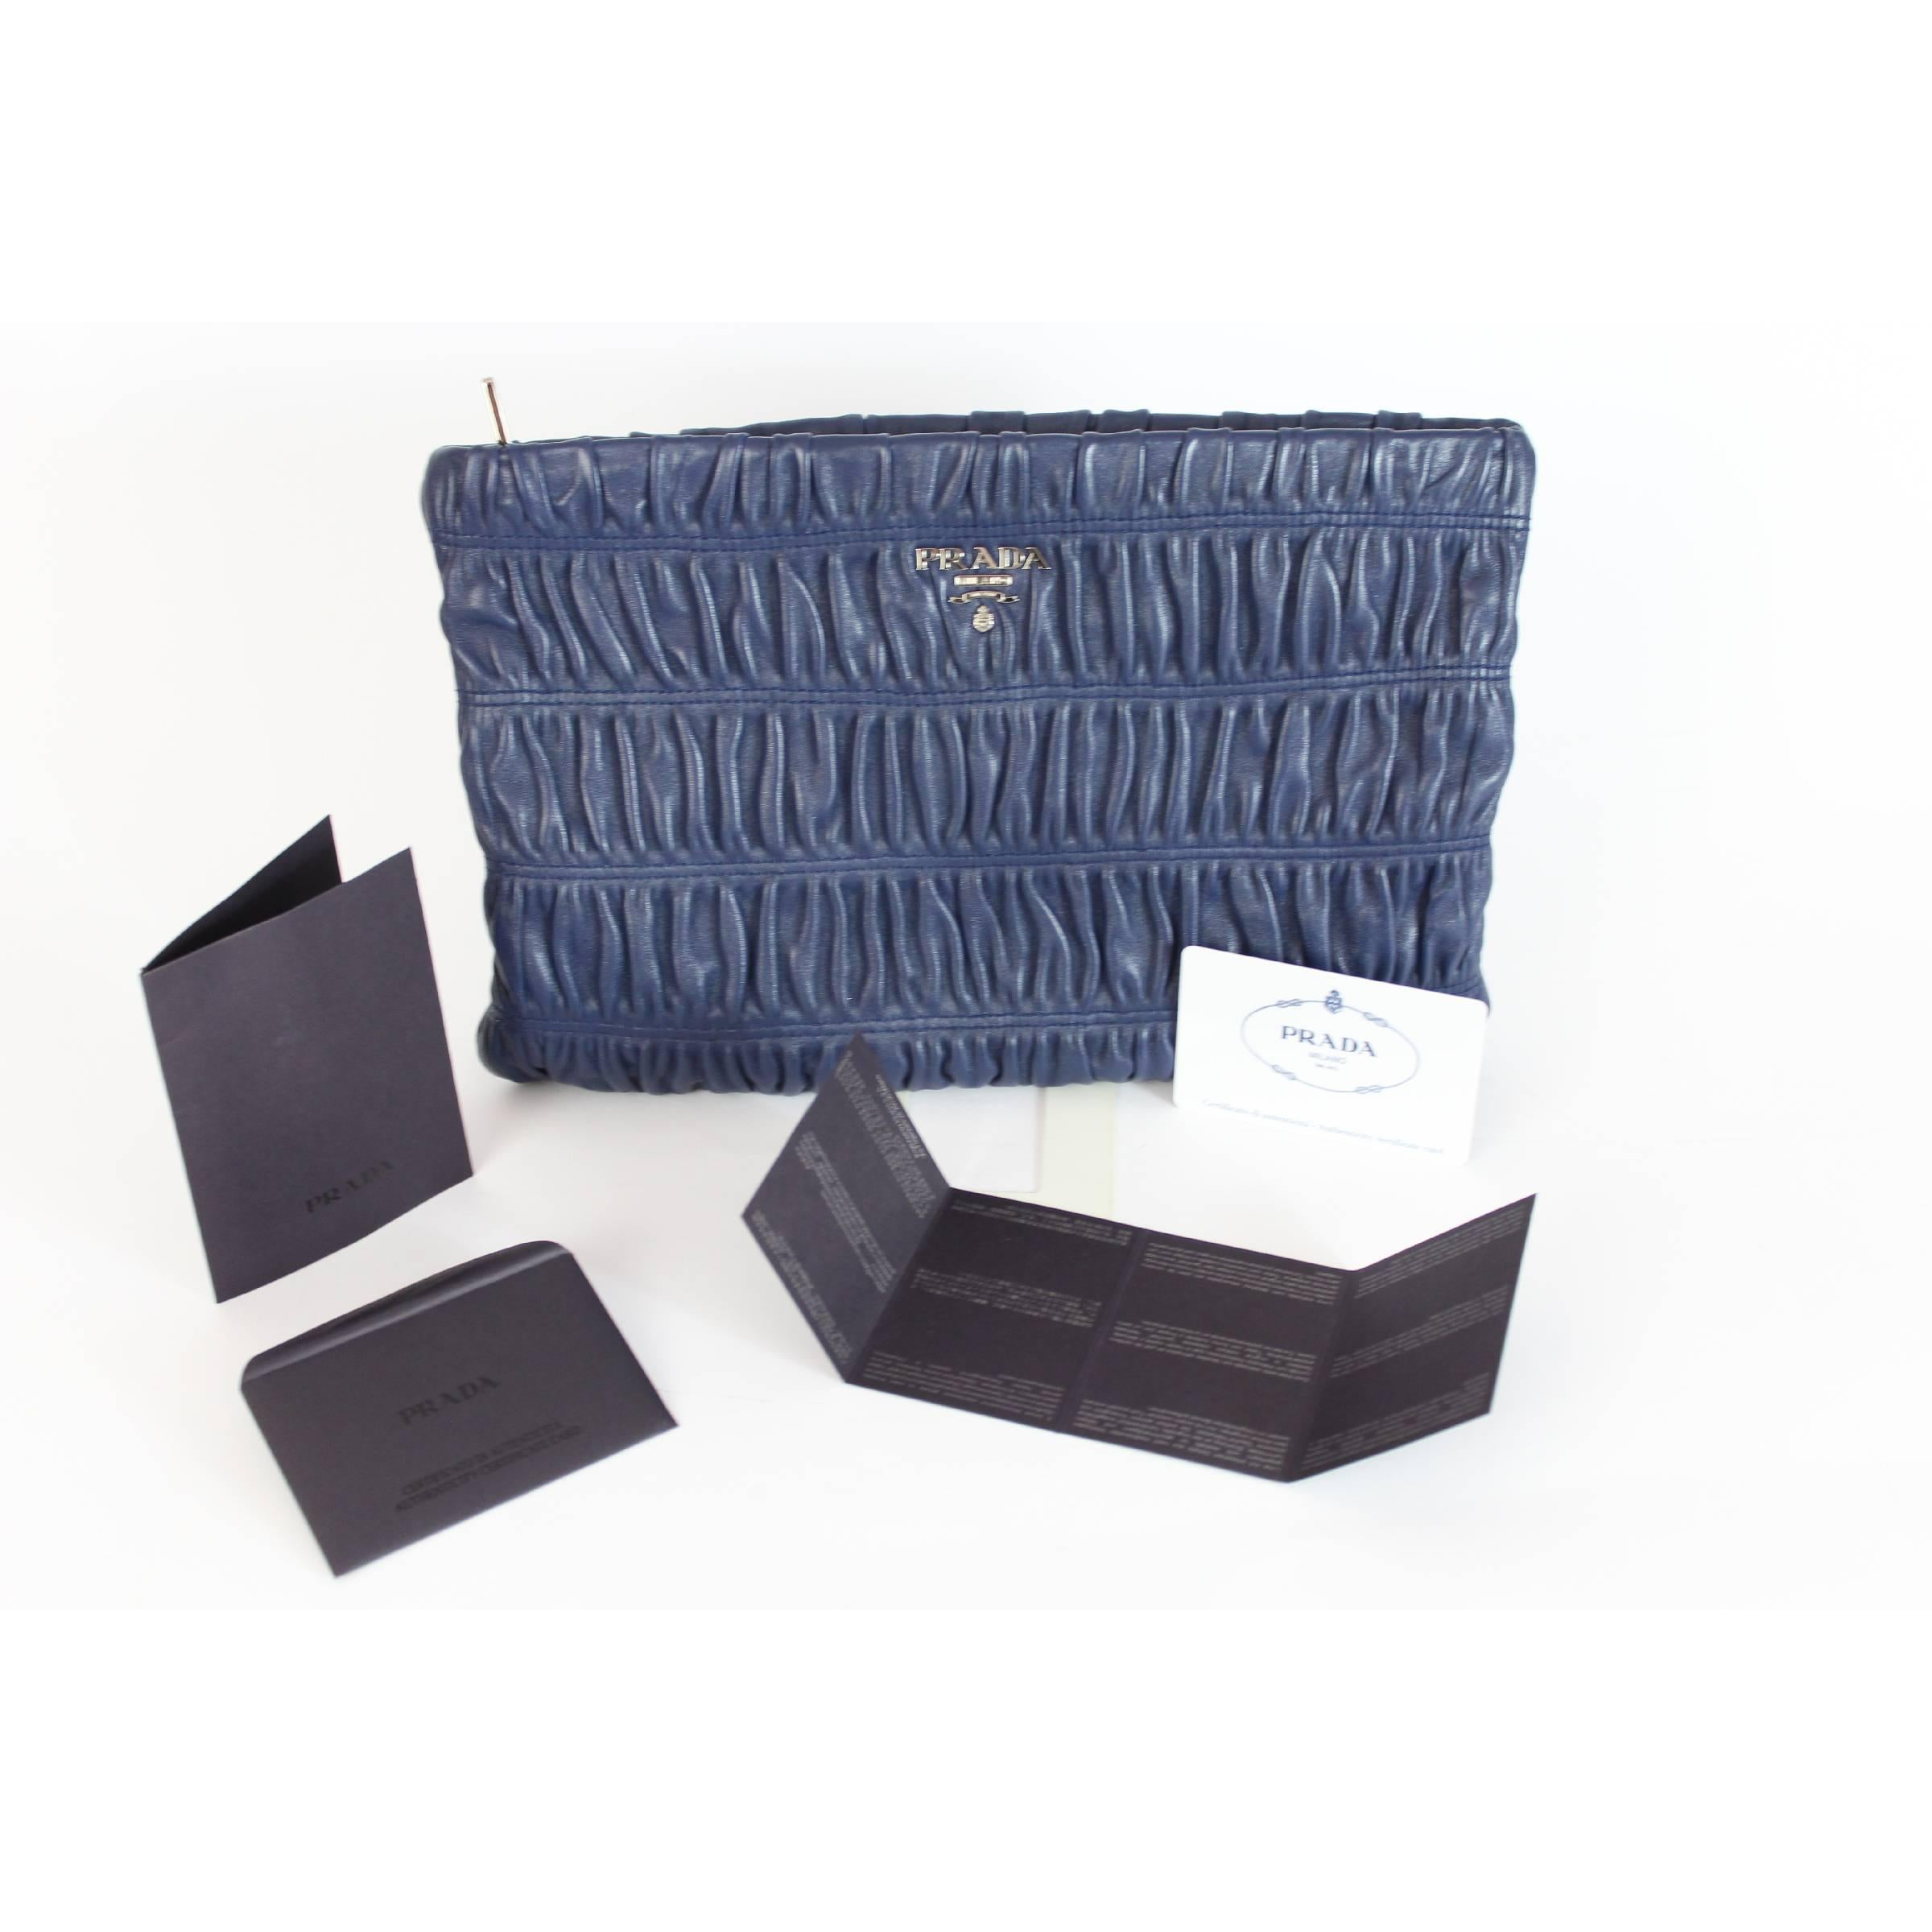 Handbag Prada model Nappa Gaufrè, blue, 100% lamb leather. Soft pochette with zip closure, inside there are pockets and dividers all in leather. Made in Italy. Code: BP0624. There is an original dustbag and a certificate of authenticity. Year